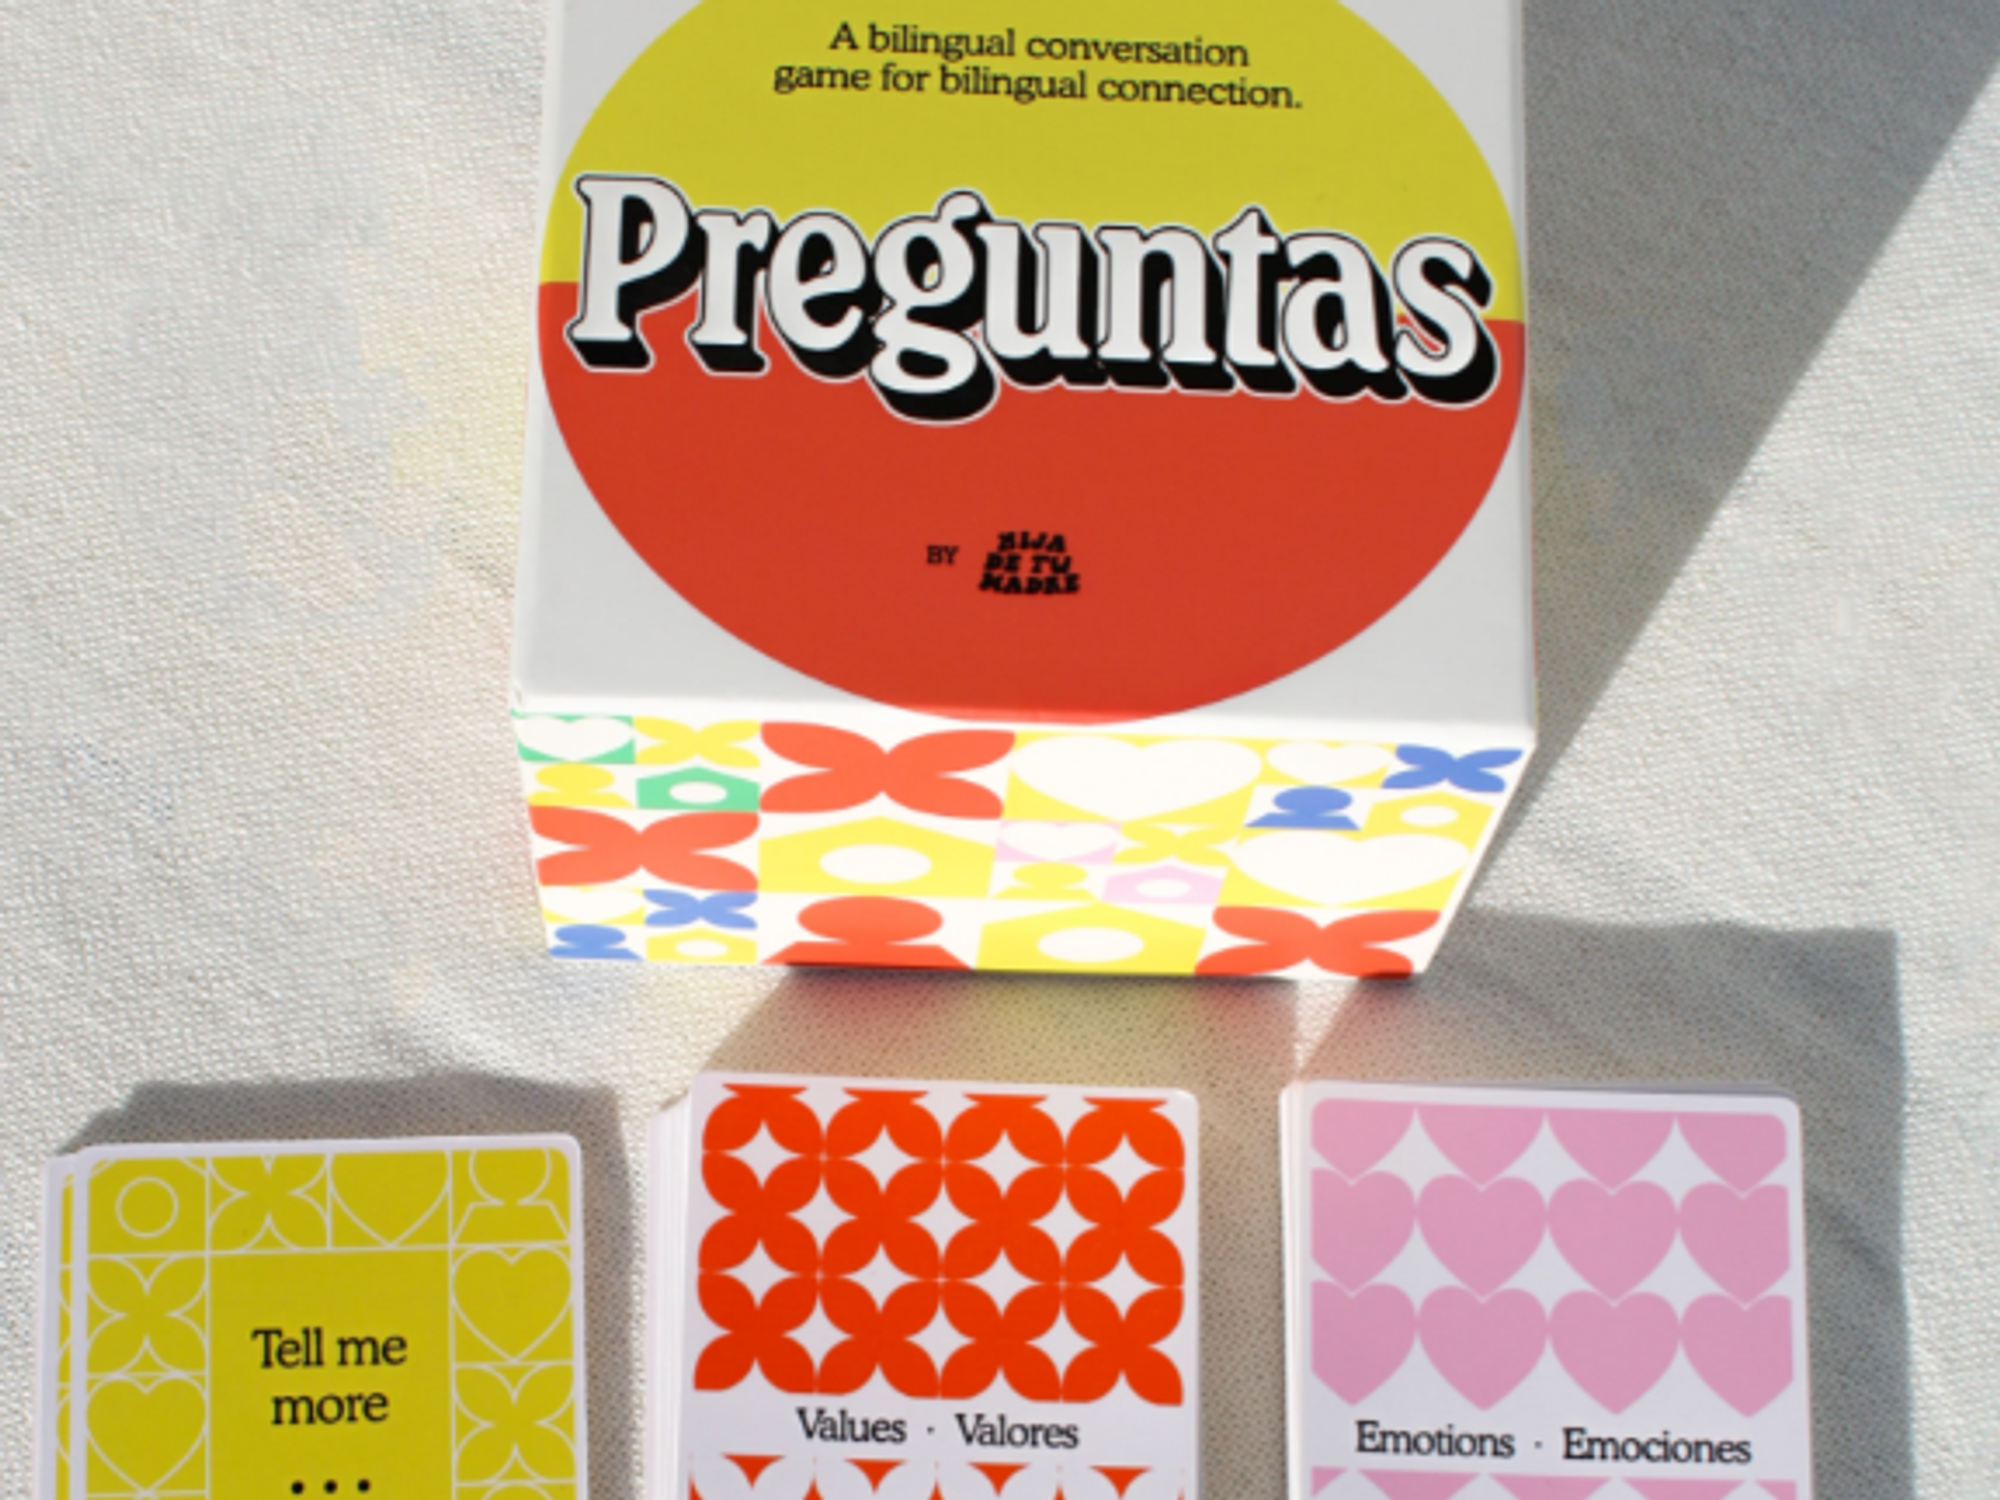 a promotional image for the latino cards game Preguntas: Bilingual Conversation